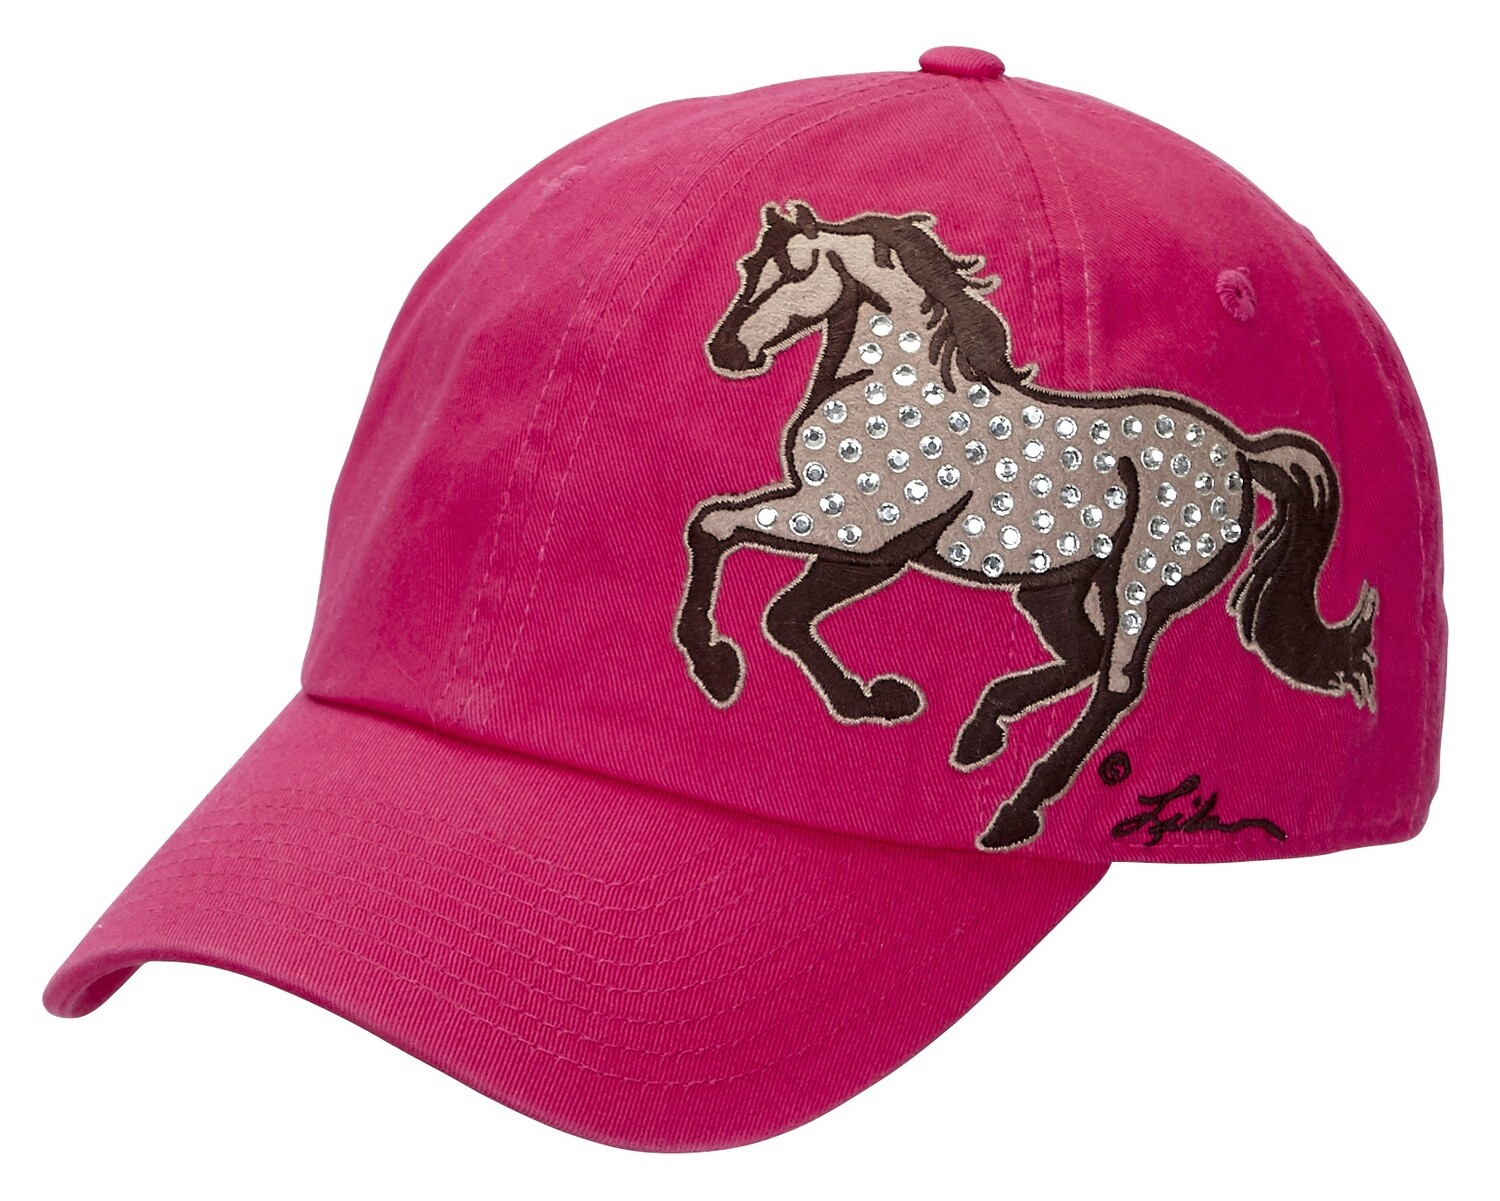 Hat - Pink w/Bling Running Horse